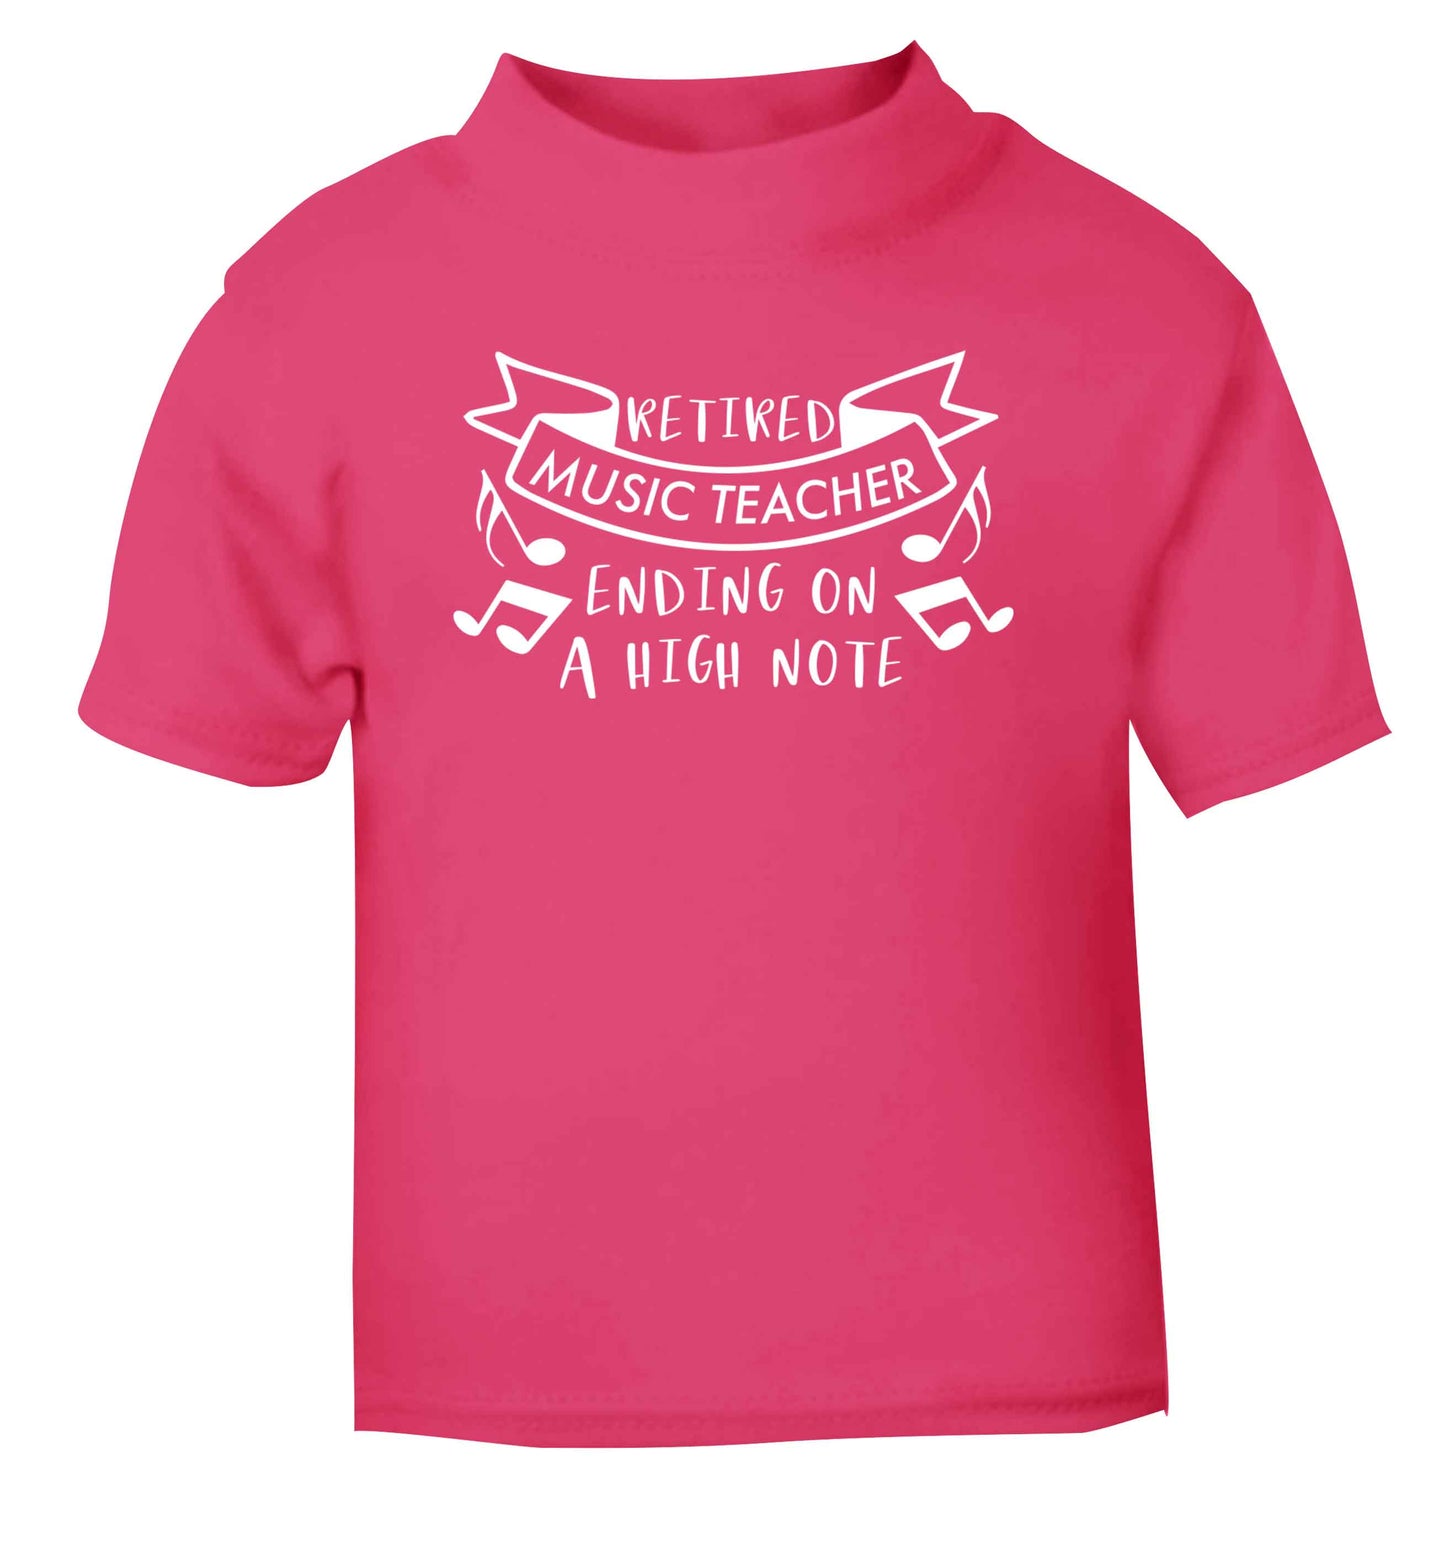 Retired music teacher ending on a high note pink Baby Toddler Tshirt 2 Years